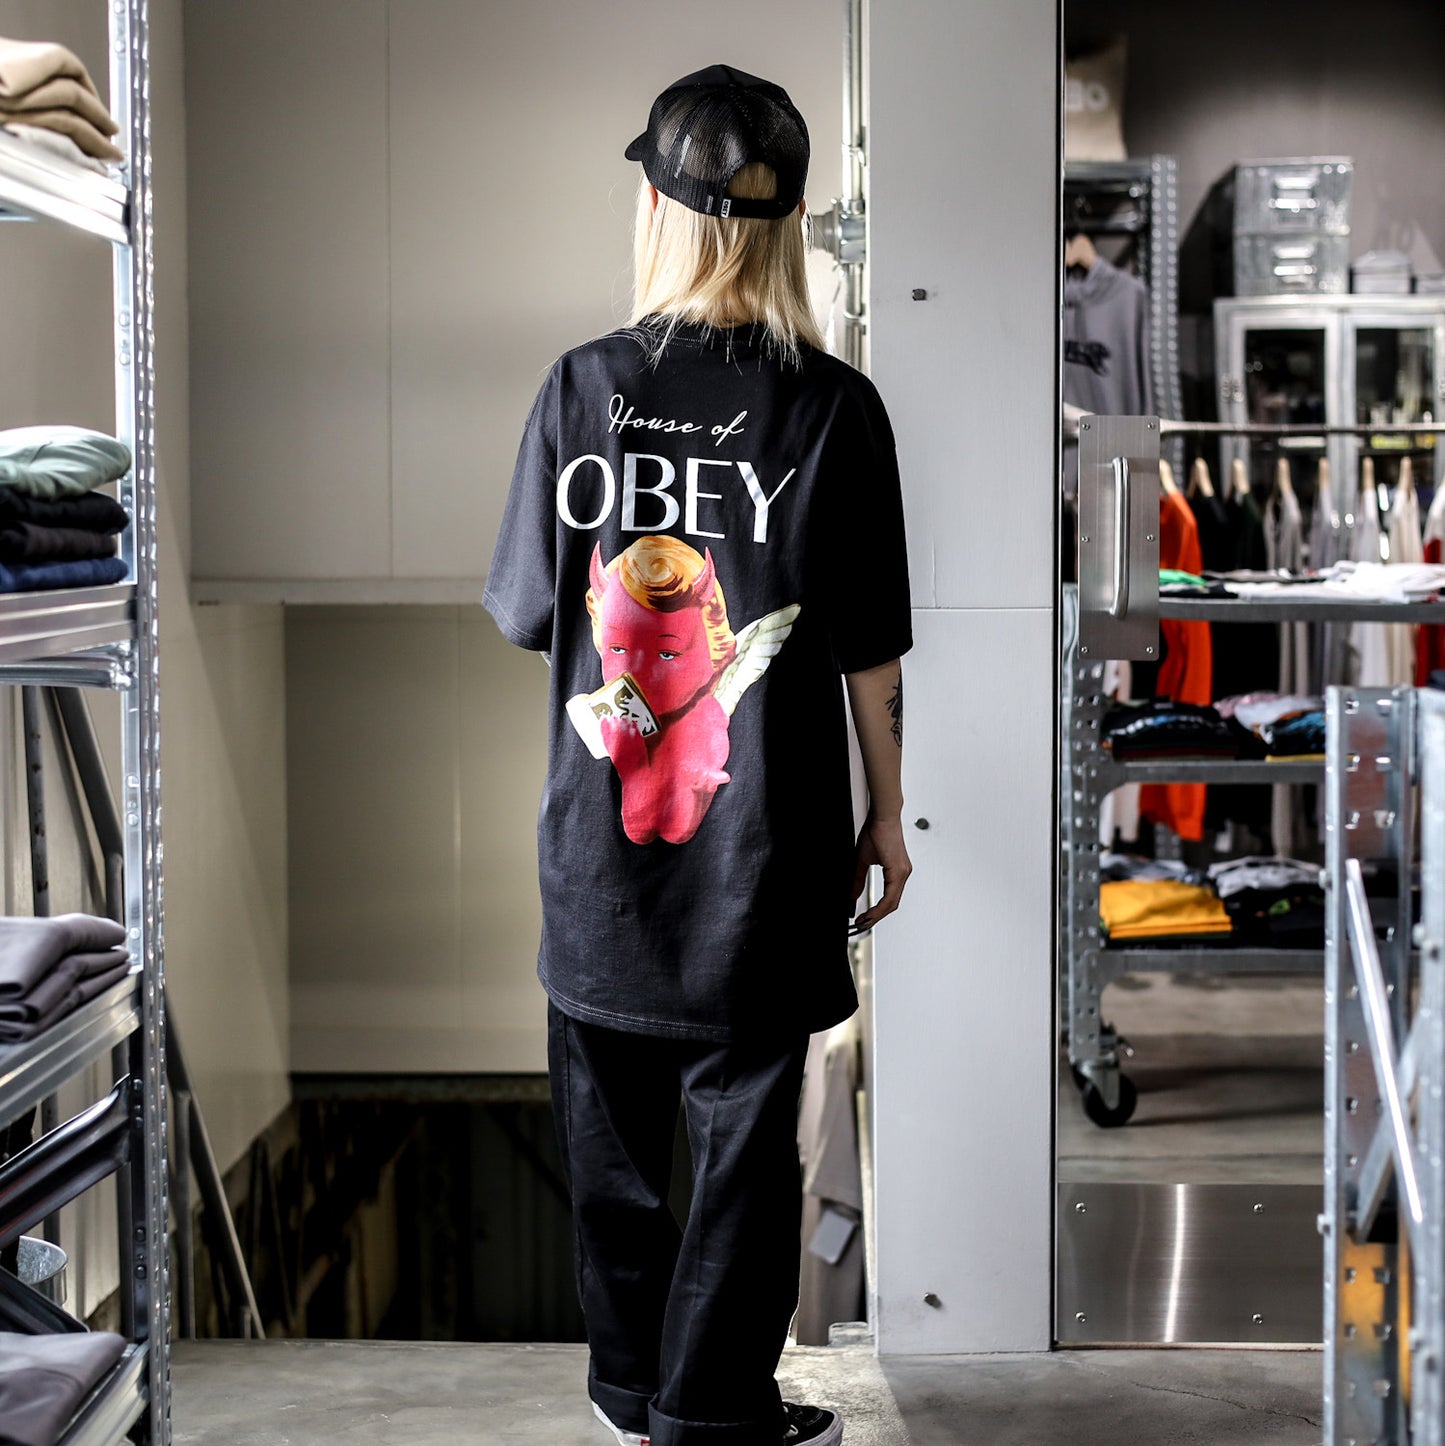 OBEY / HOUSE OF OBEY CLASSIC TEE (BLACK)